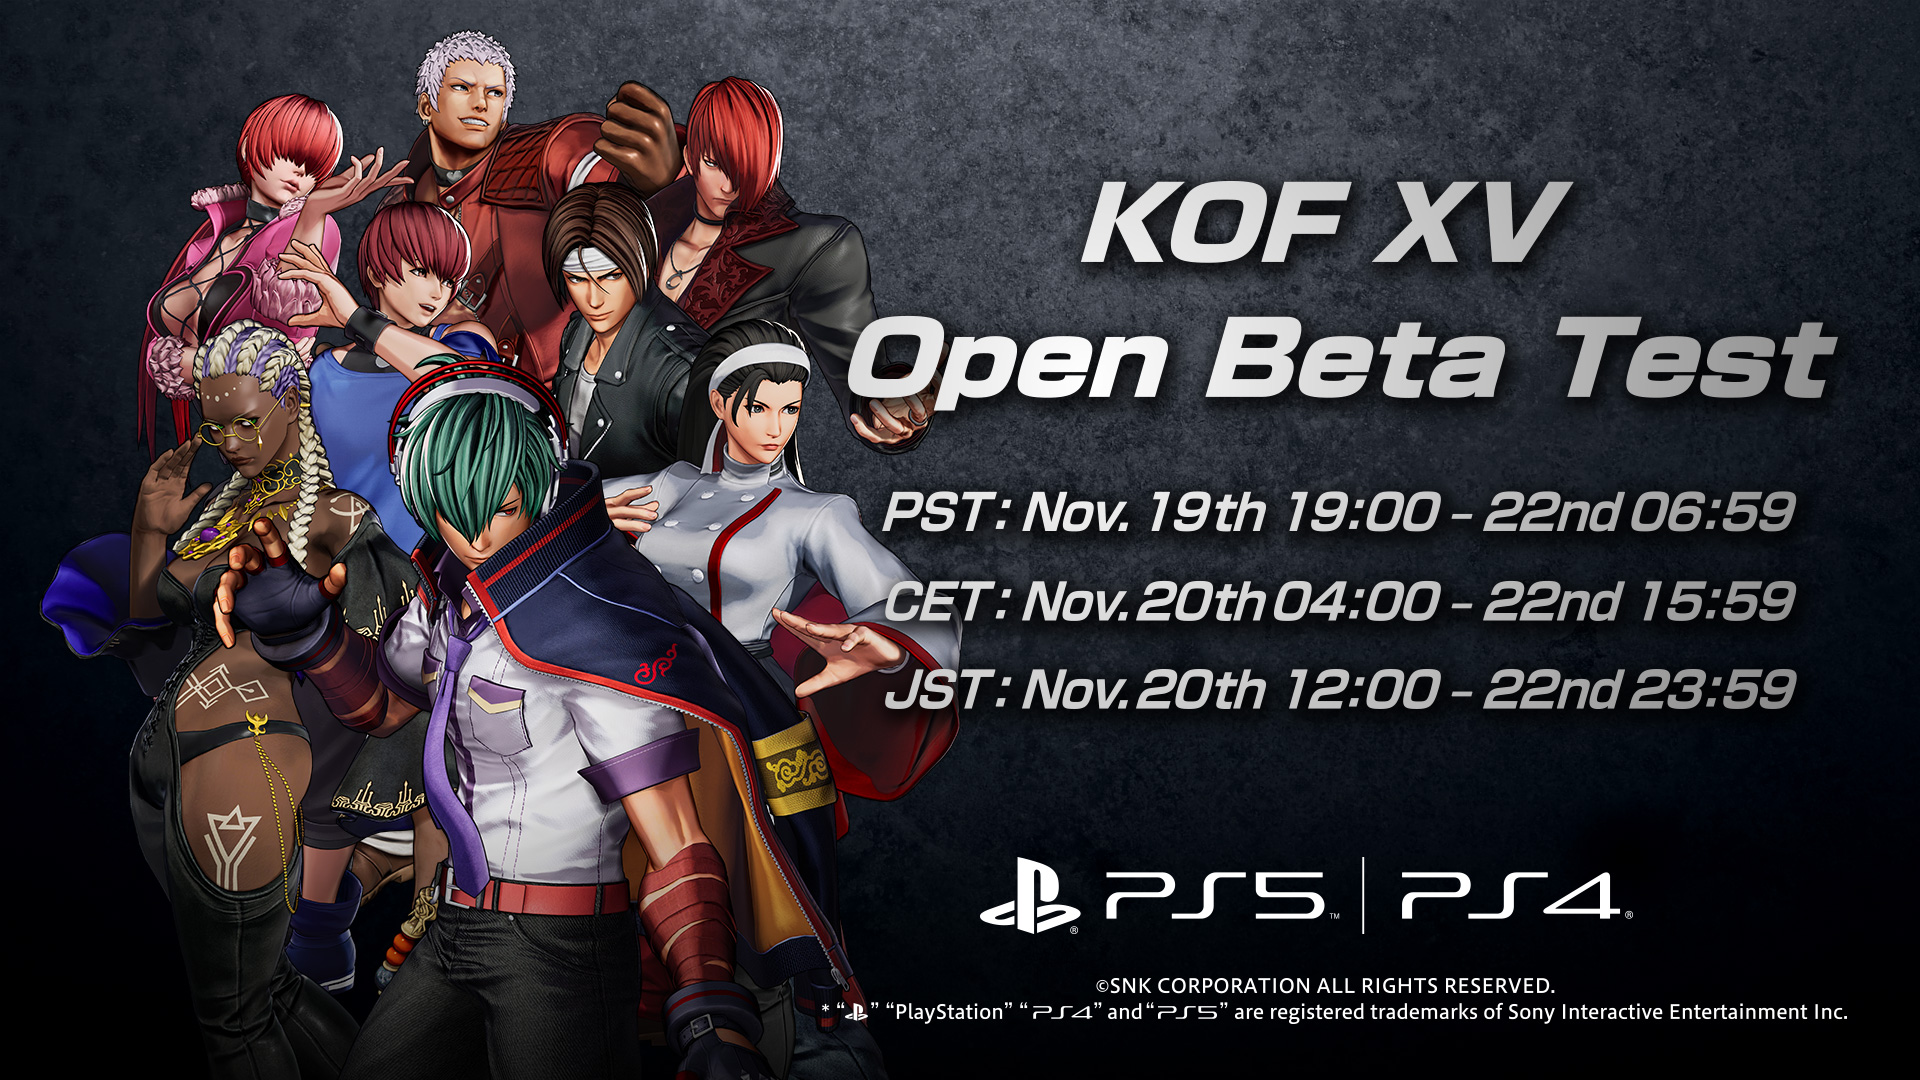 SNK GLOBAL on Twitter: "【KOF XV】 The pre-download Open Beta Test of KOF XV has now begun! -Download Method Please download the test version from the PS4/PS5 THE KING OF FIGHTERS